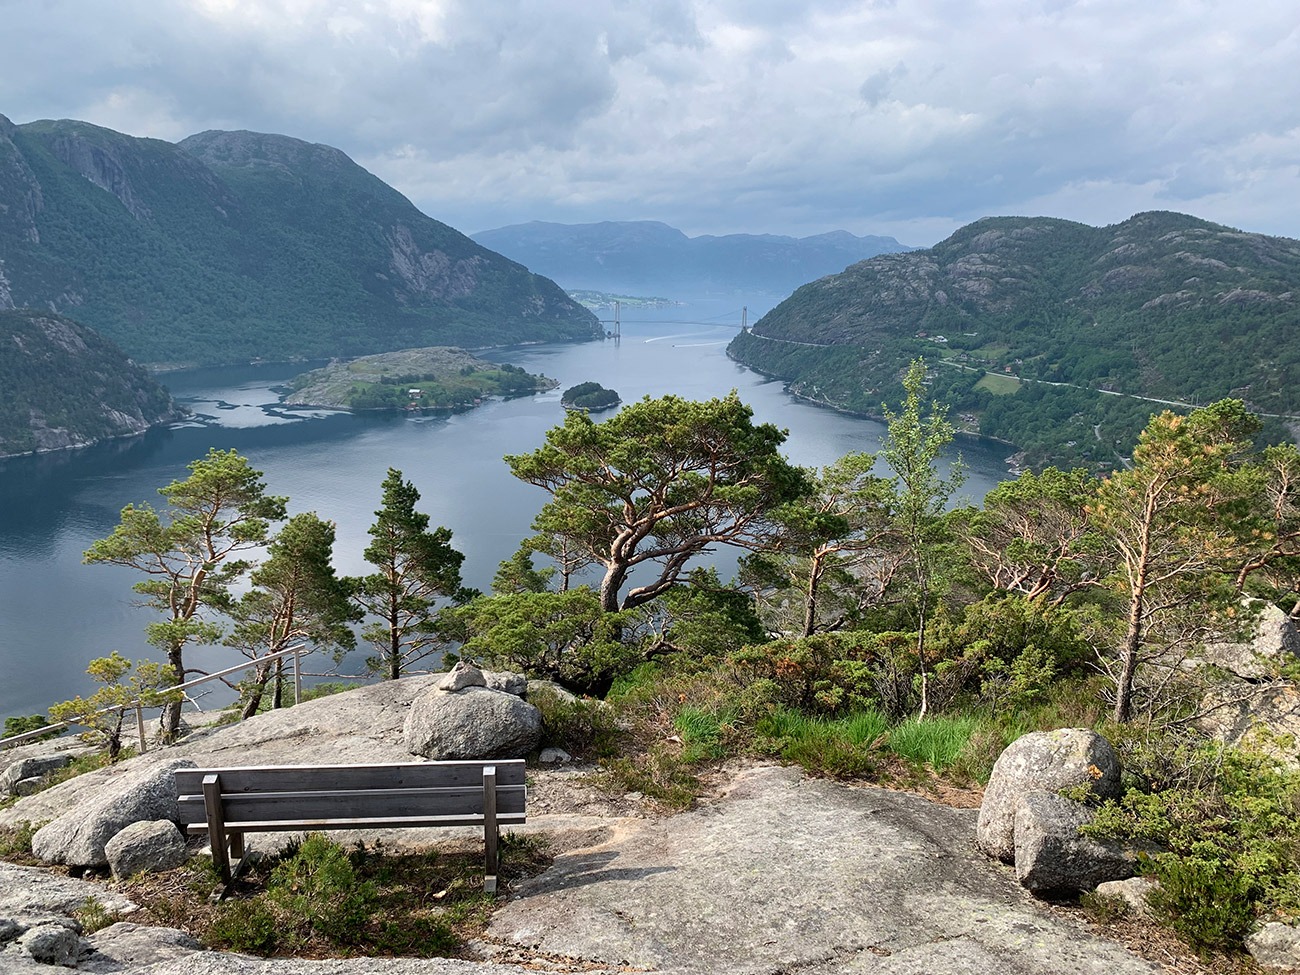 Fantapytten, Hike to Fantapytten from Høllesliheia &#8211; Lysefjord&#8217;s Infinity Pool. Return hike along several mountain cliffs and gorges with panoramic view-points., Welsh Man Walking